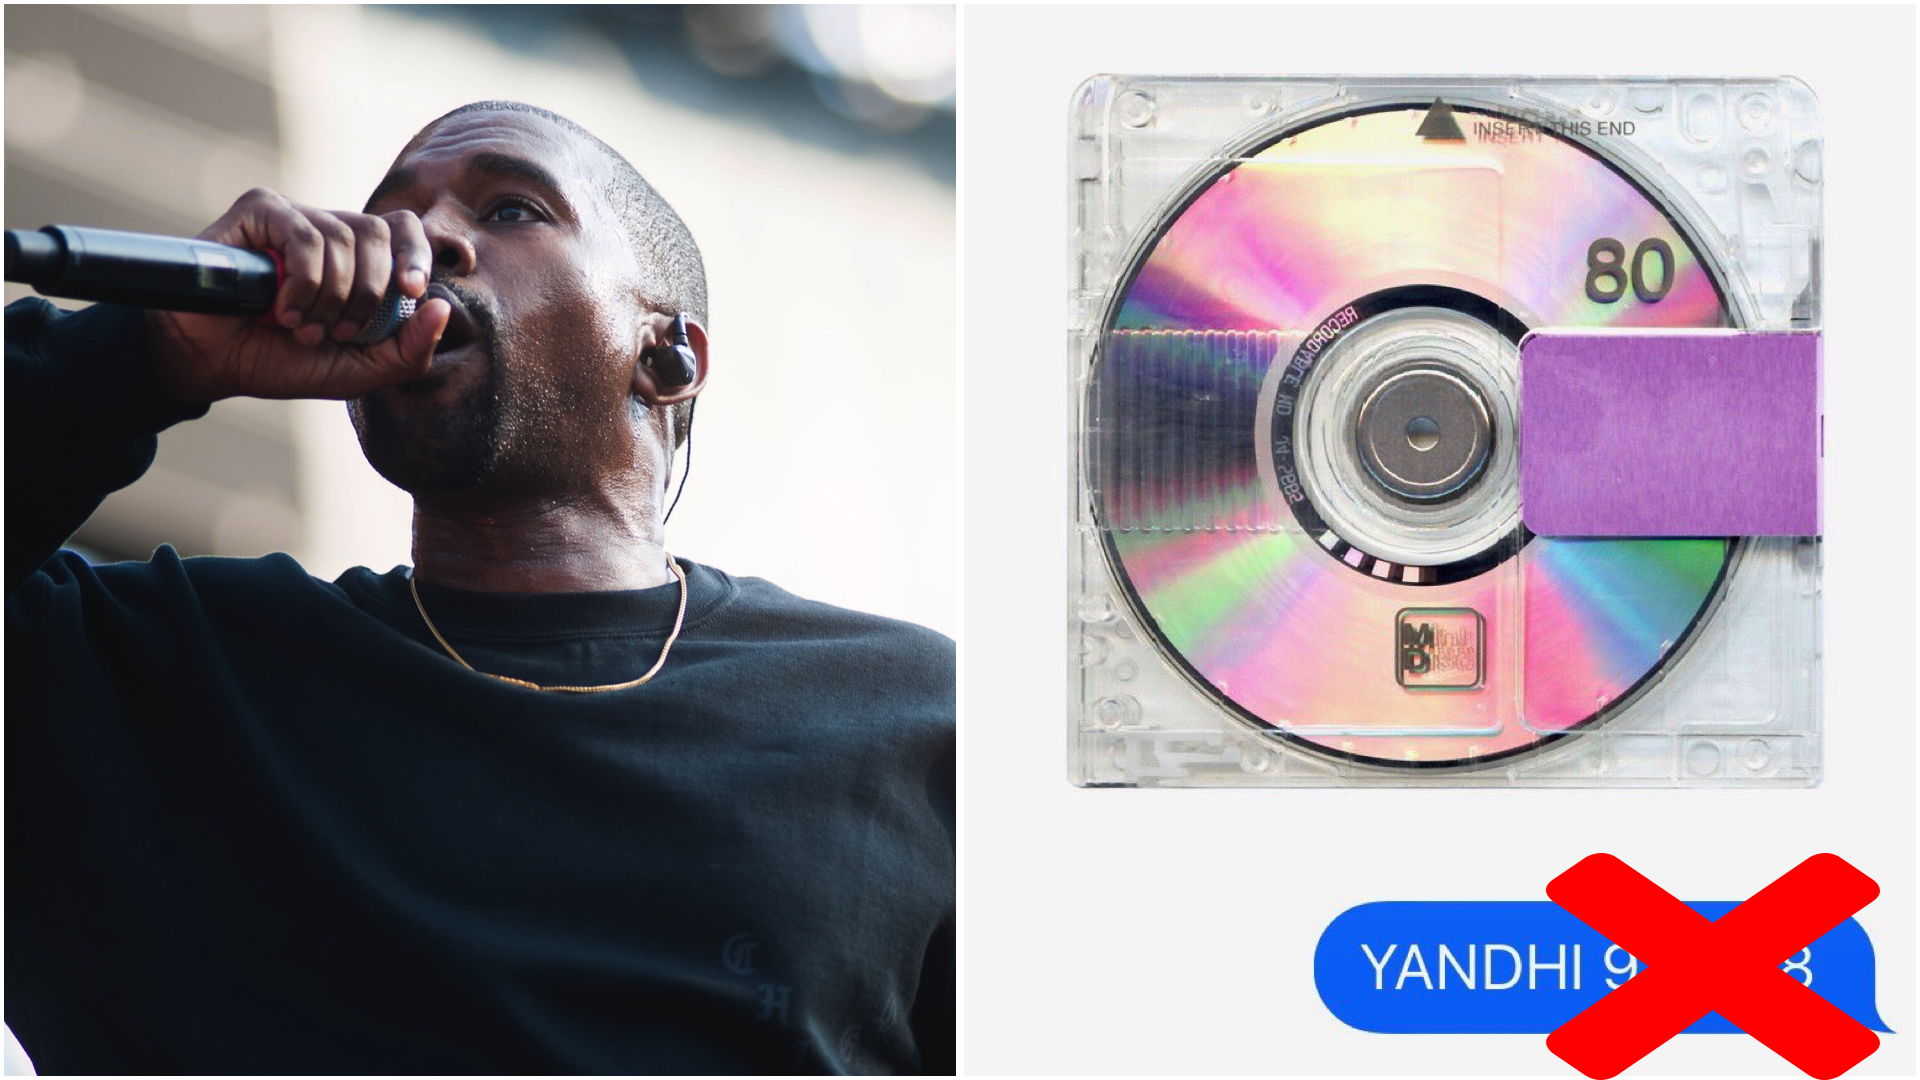 4 years ago today Kanye West forgot to release 'YANDHI' 😔